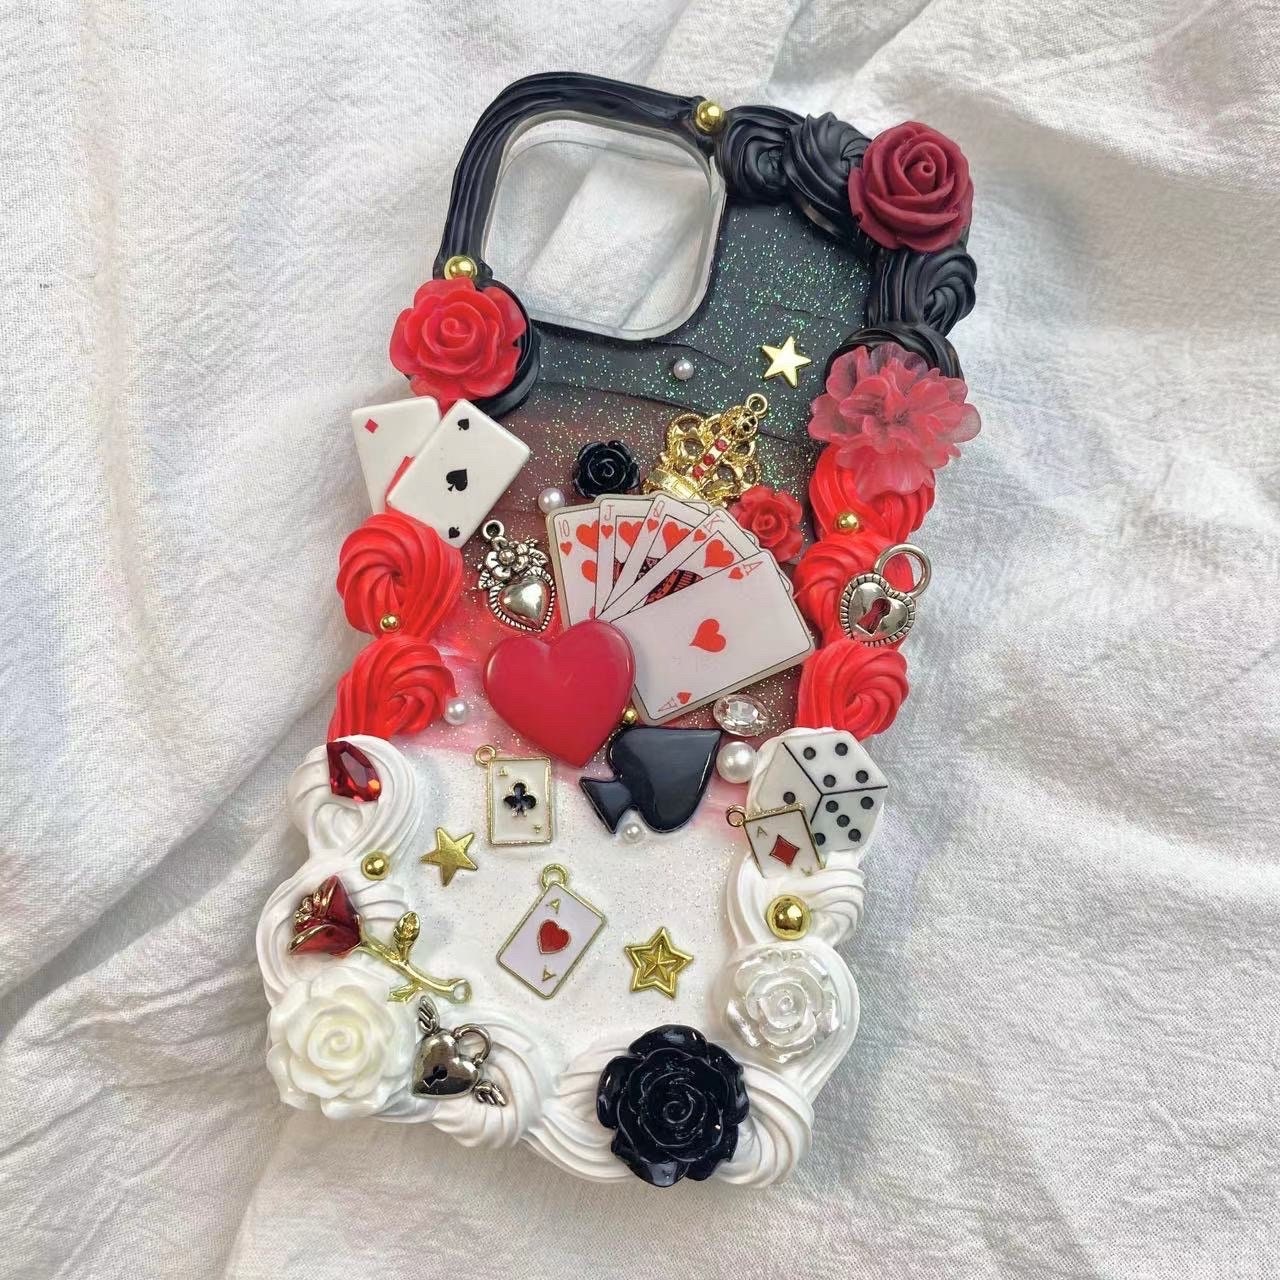 Decoden Phone Case DIY Kit Starter Package Fake Cream Decoden Materials  Charms 